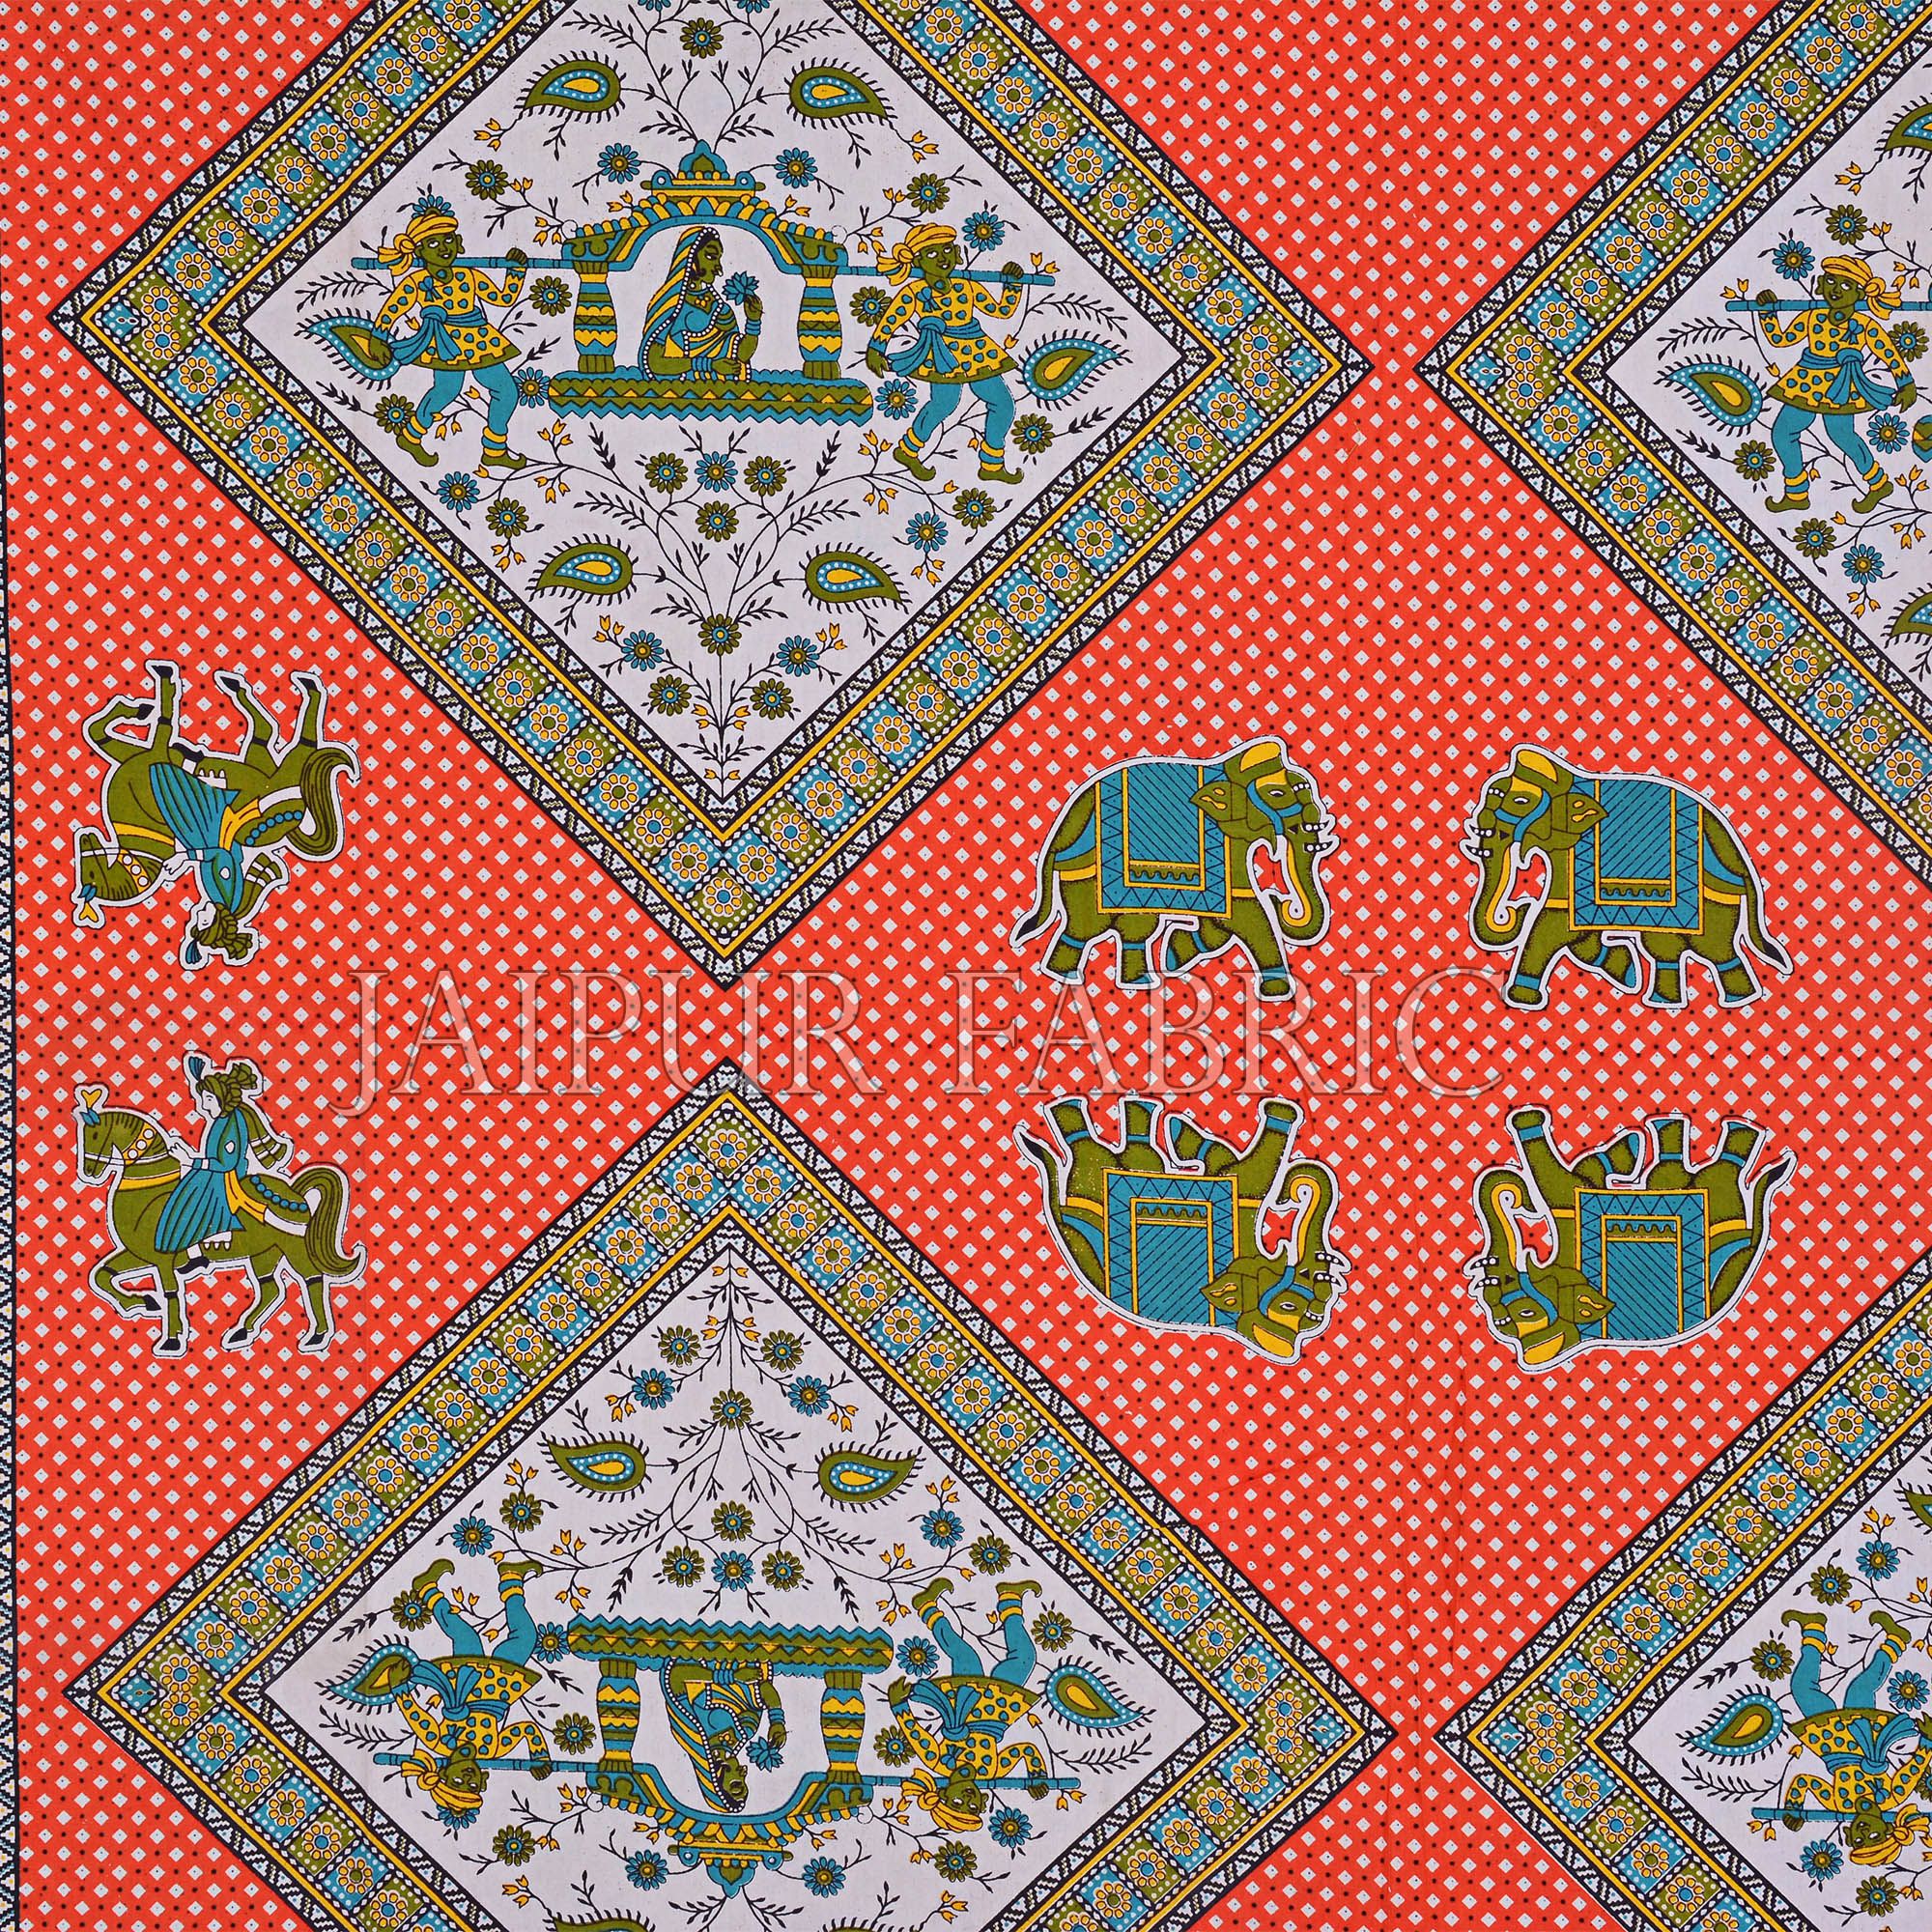 Orange base Jaipur doli design with elephant Print Double Bed Sheet and Pillow Covers